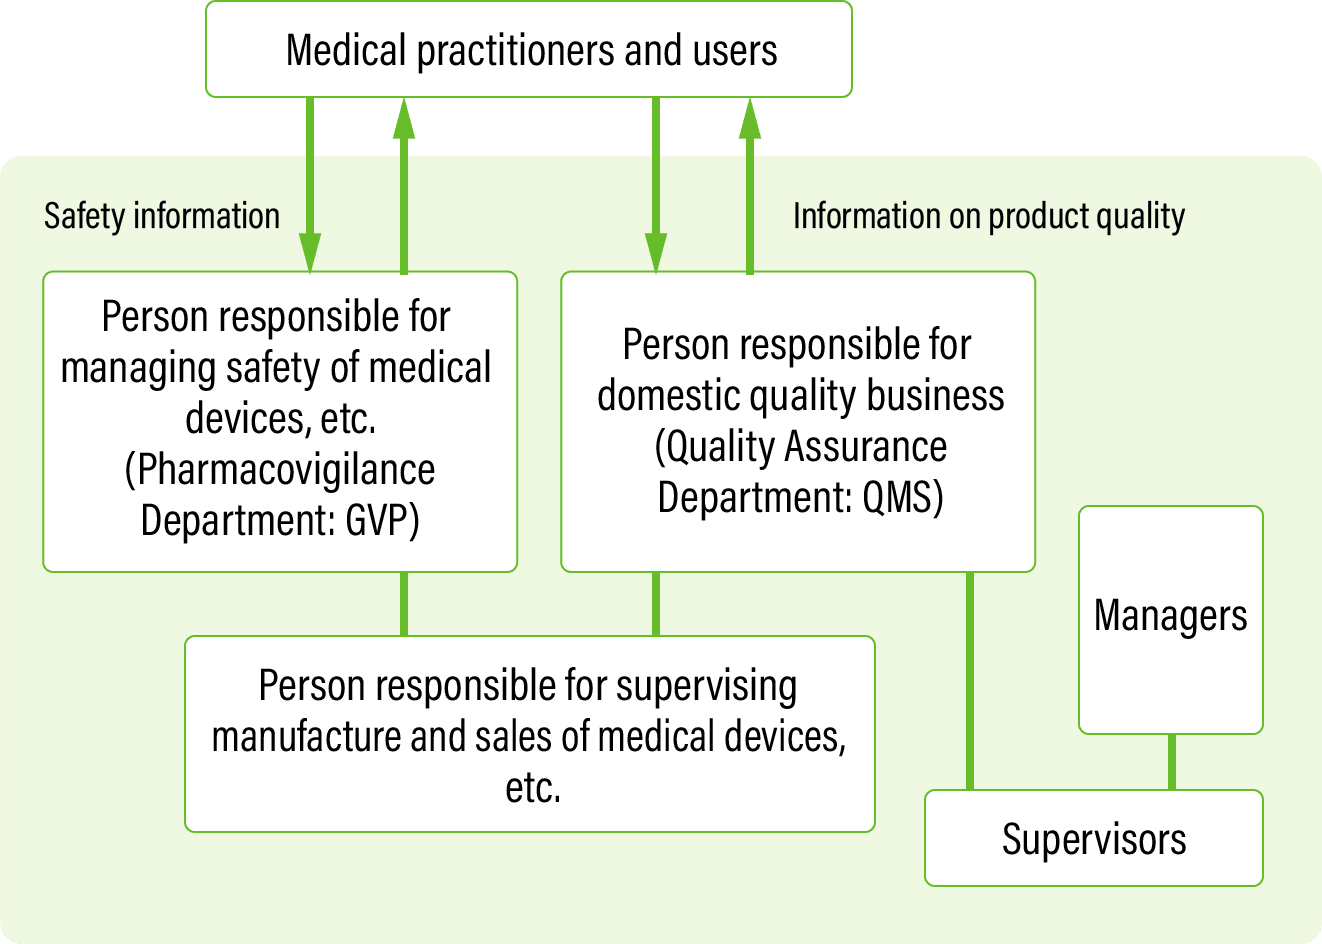 Manufacturing and Sales Structure - In vitro diagnostics/medical devices